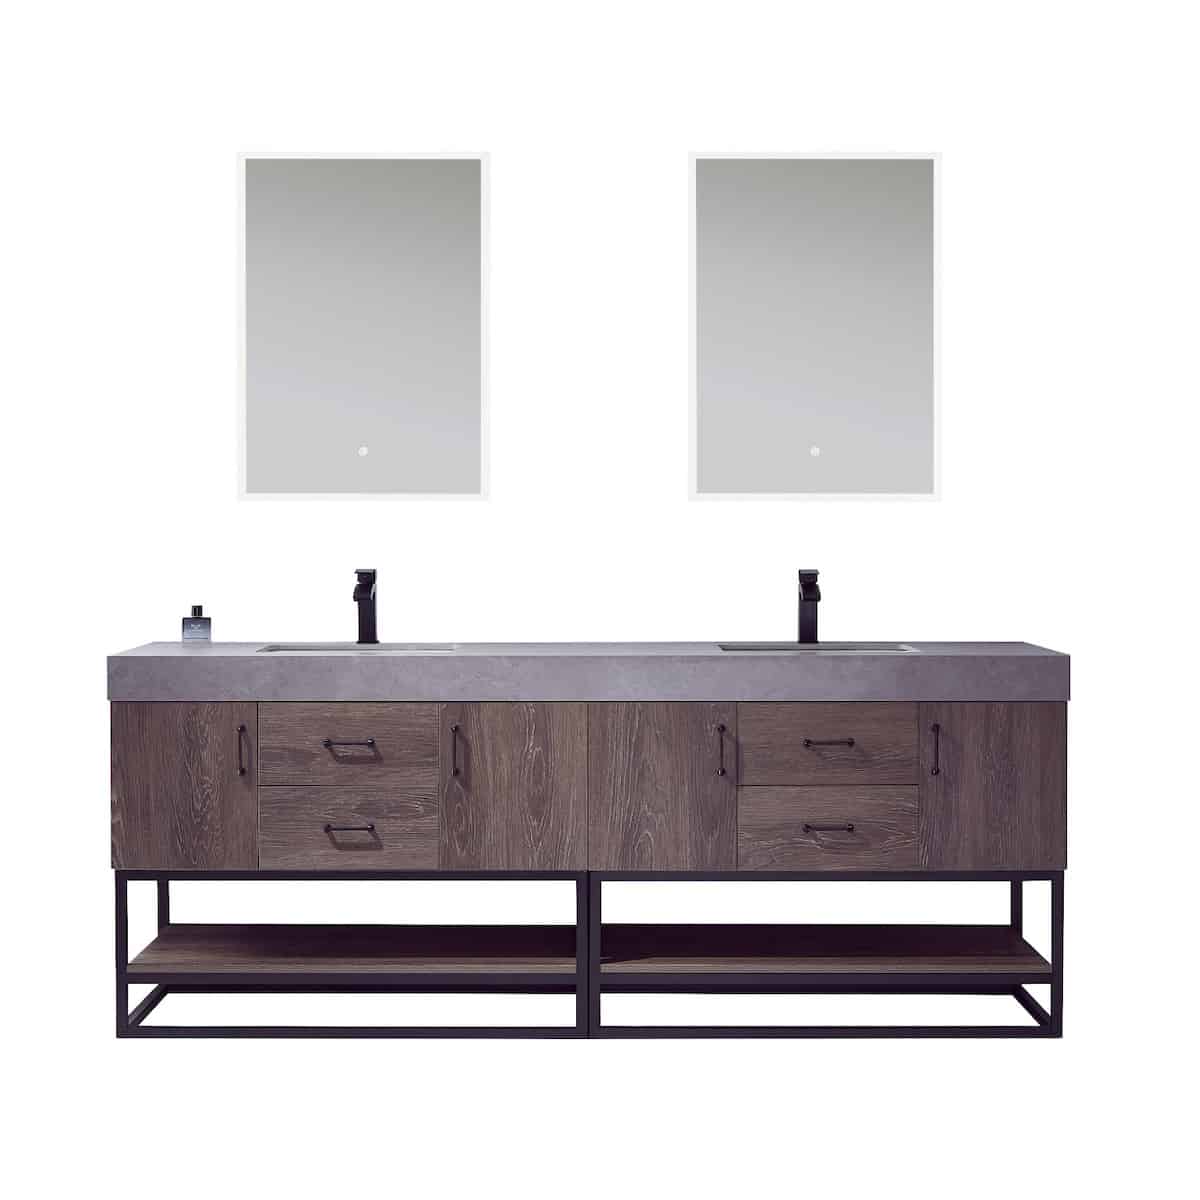 Vinnova Alistair 84 Inch Freestanding Double Sink Bath Vanity in North Carolina Oak and Matte Black Frame with Grey Sintered Stone Top With Mirrors 789084B-NC-WK